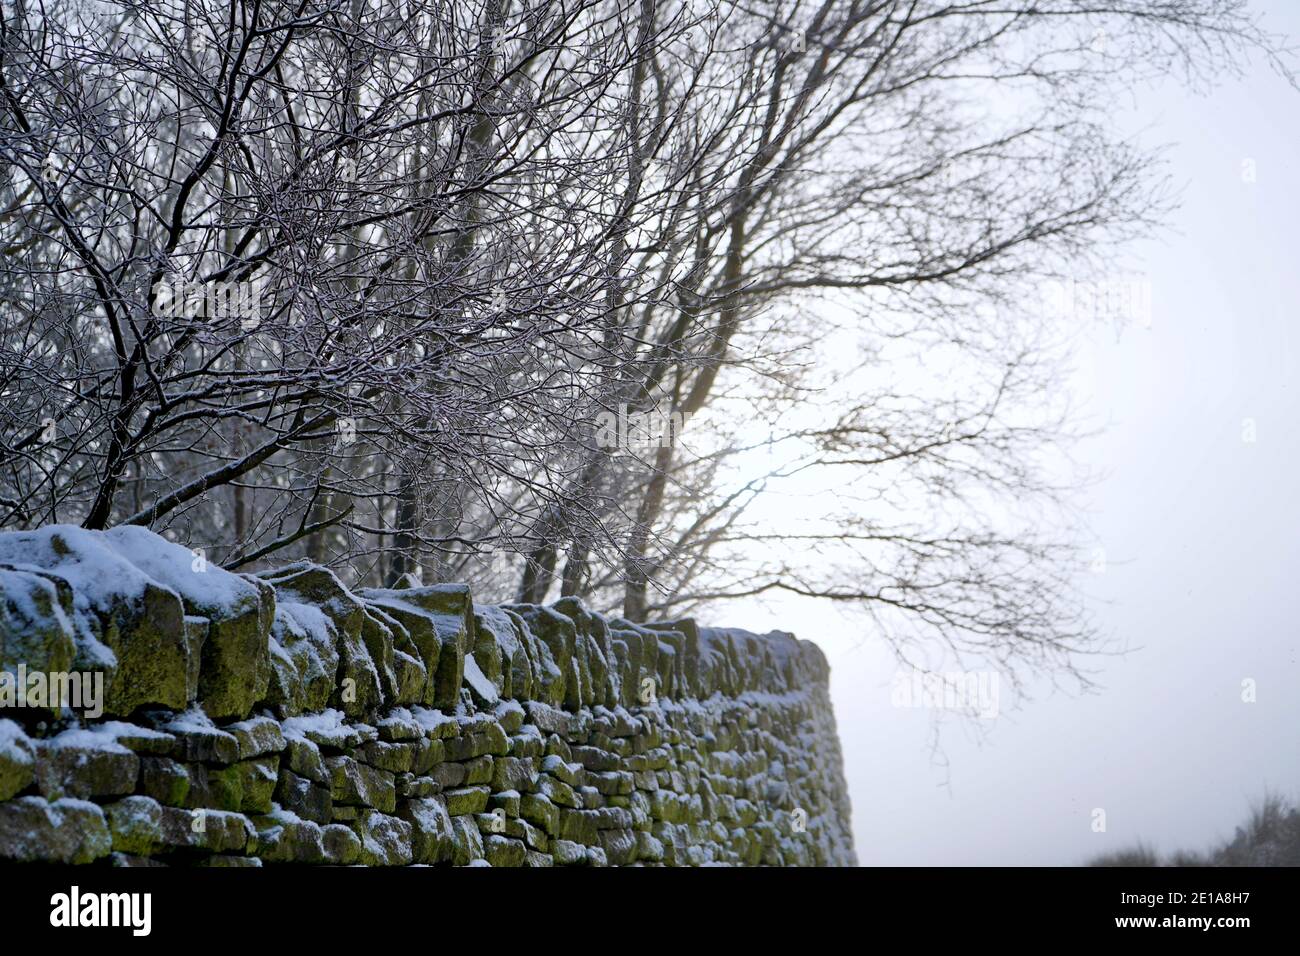 Dry stone wall in the snow Stock Photo